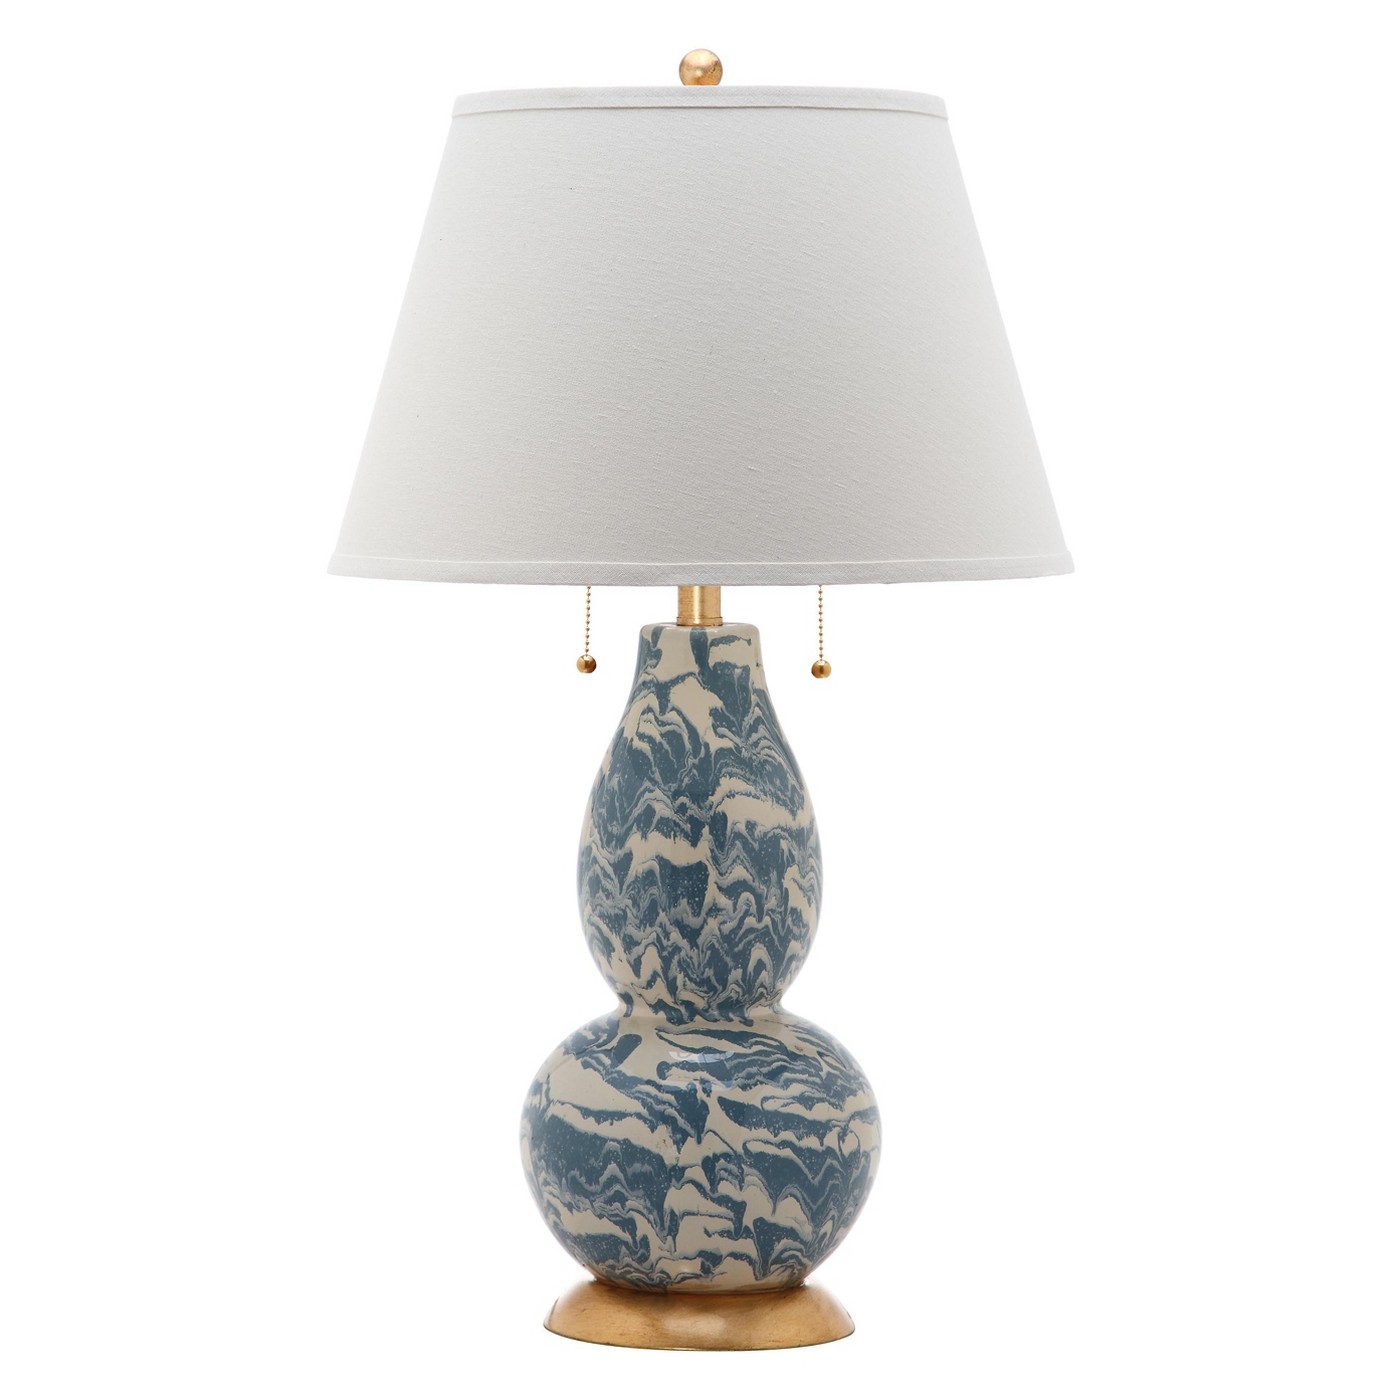 Color Swirls Glass Table Lamp, $76.99